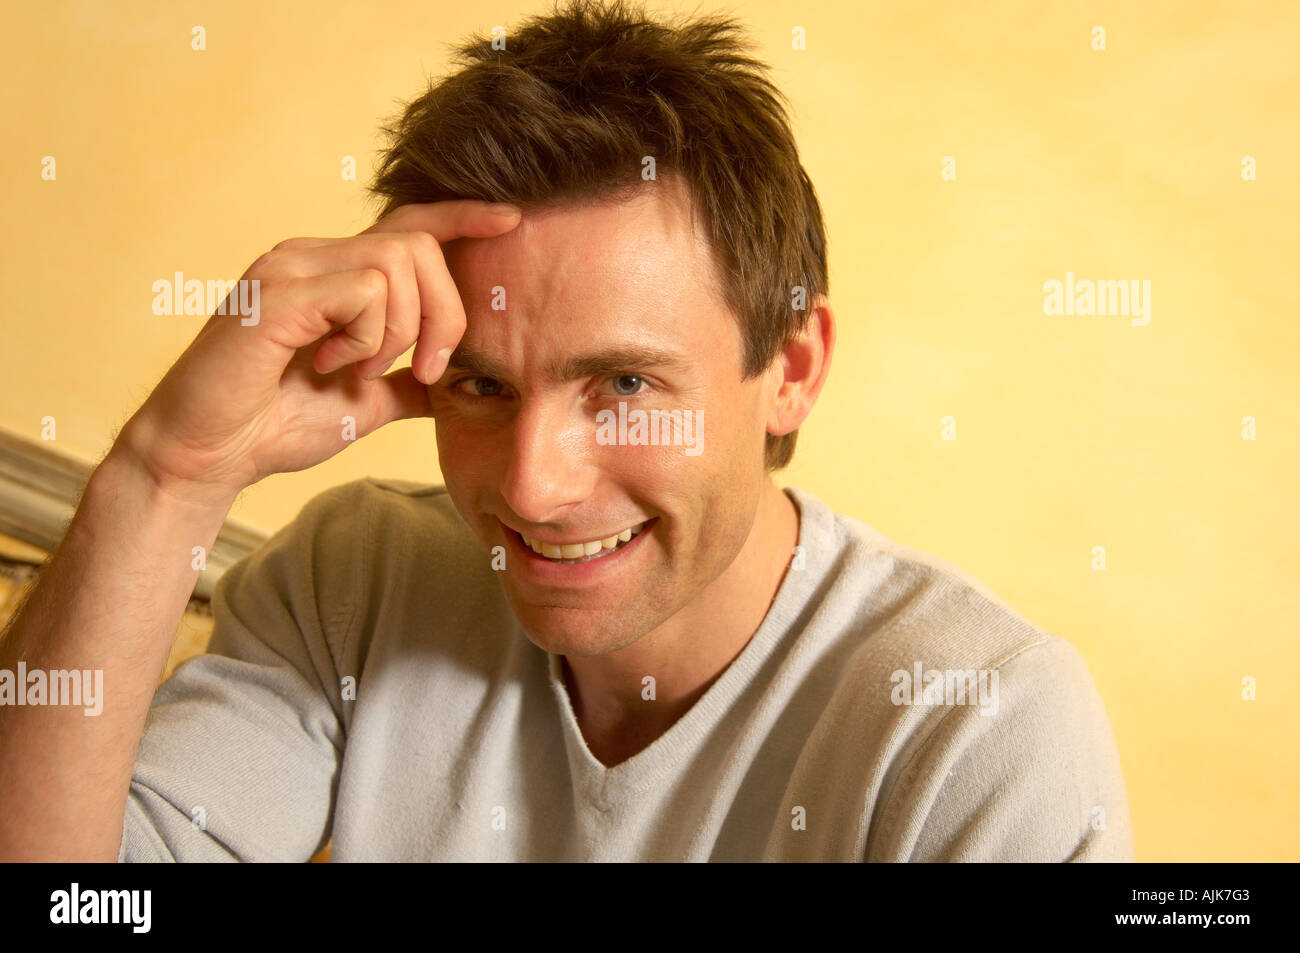 close up of a man looking at the camera smiling with a hand on his forehead Stock Photo